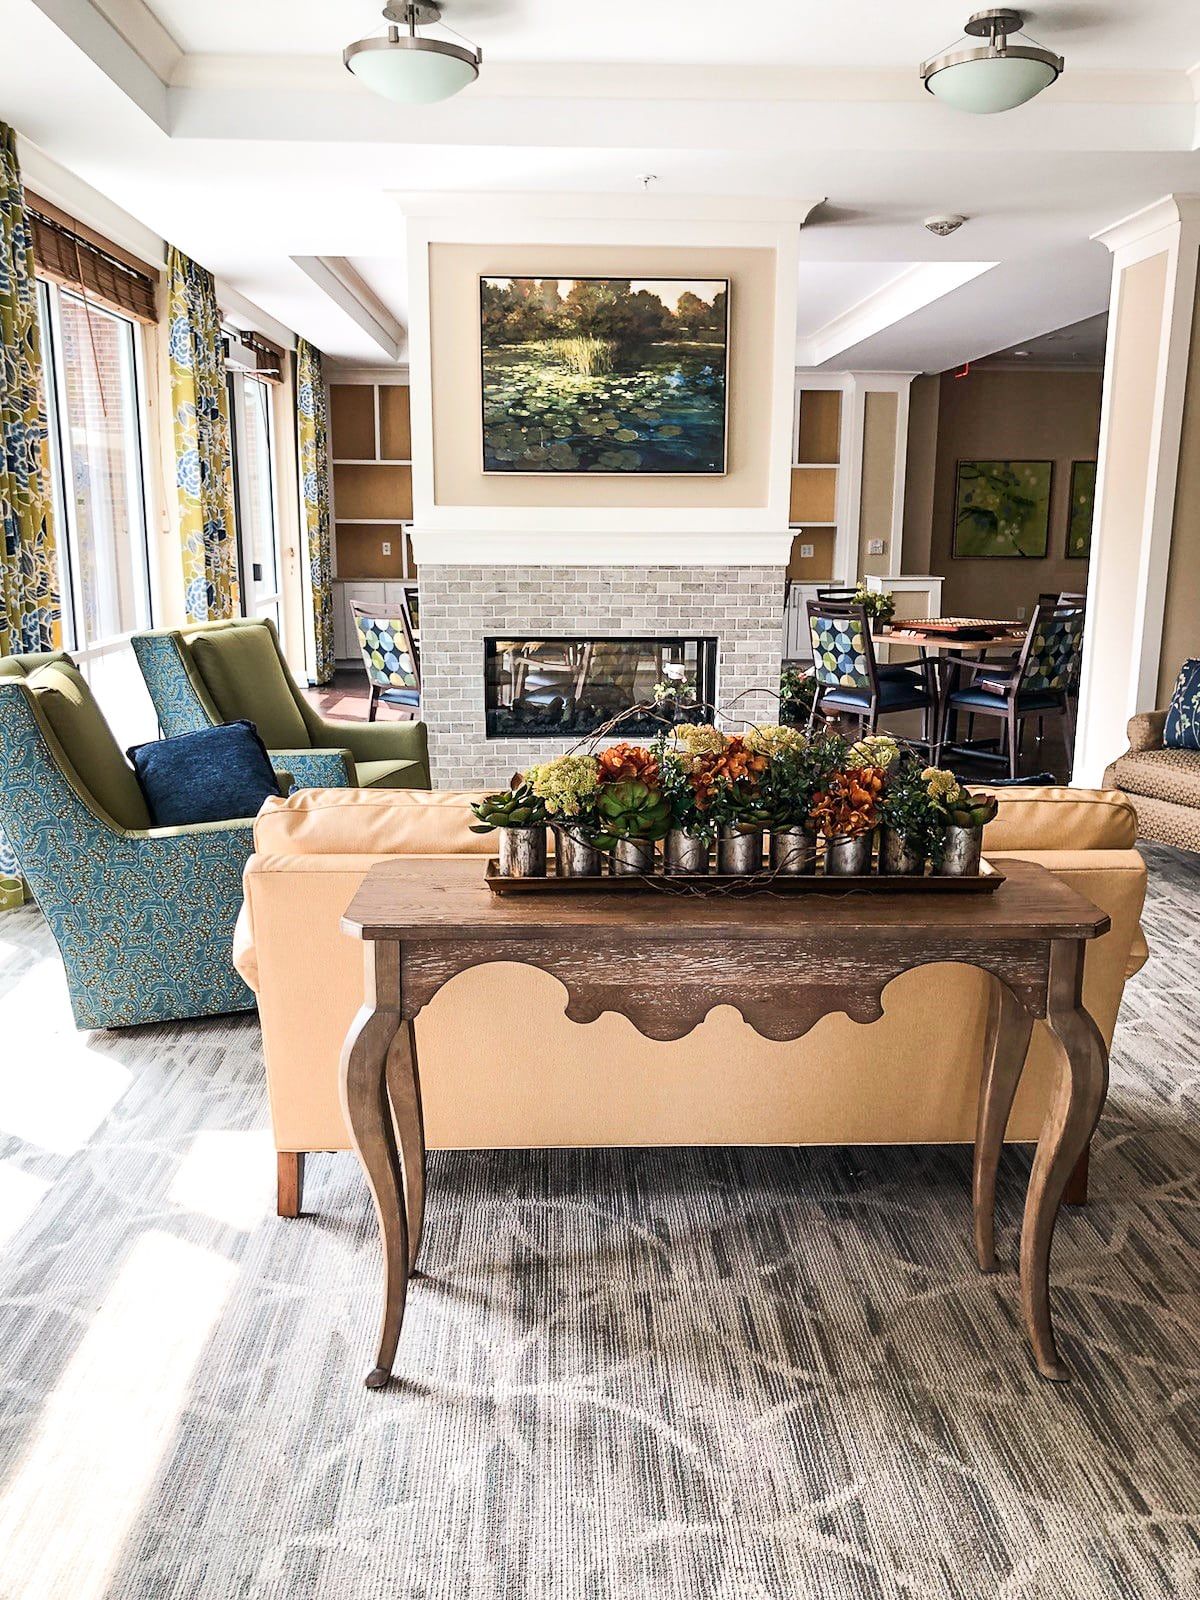 Interior view of Maple Heights Senior Living community featuring modern furniture and design.